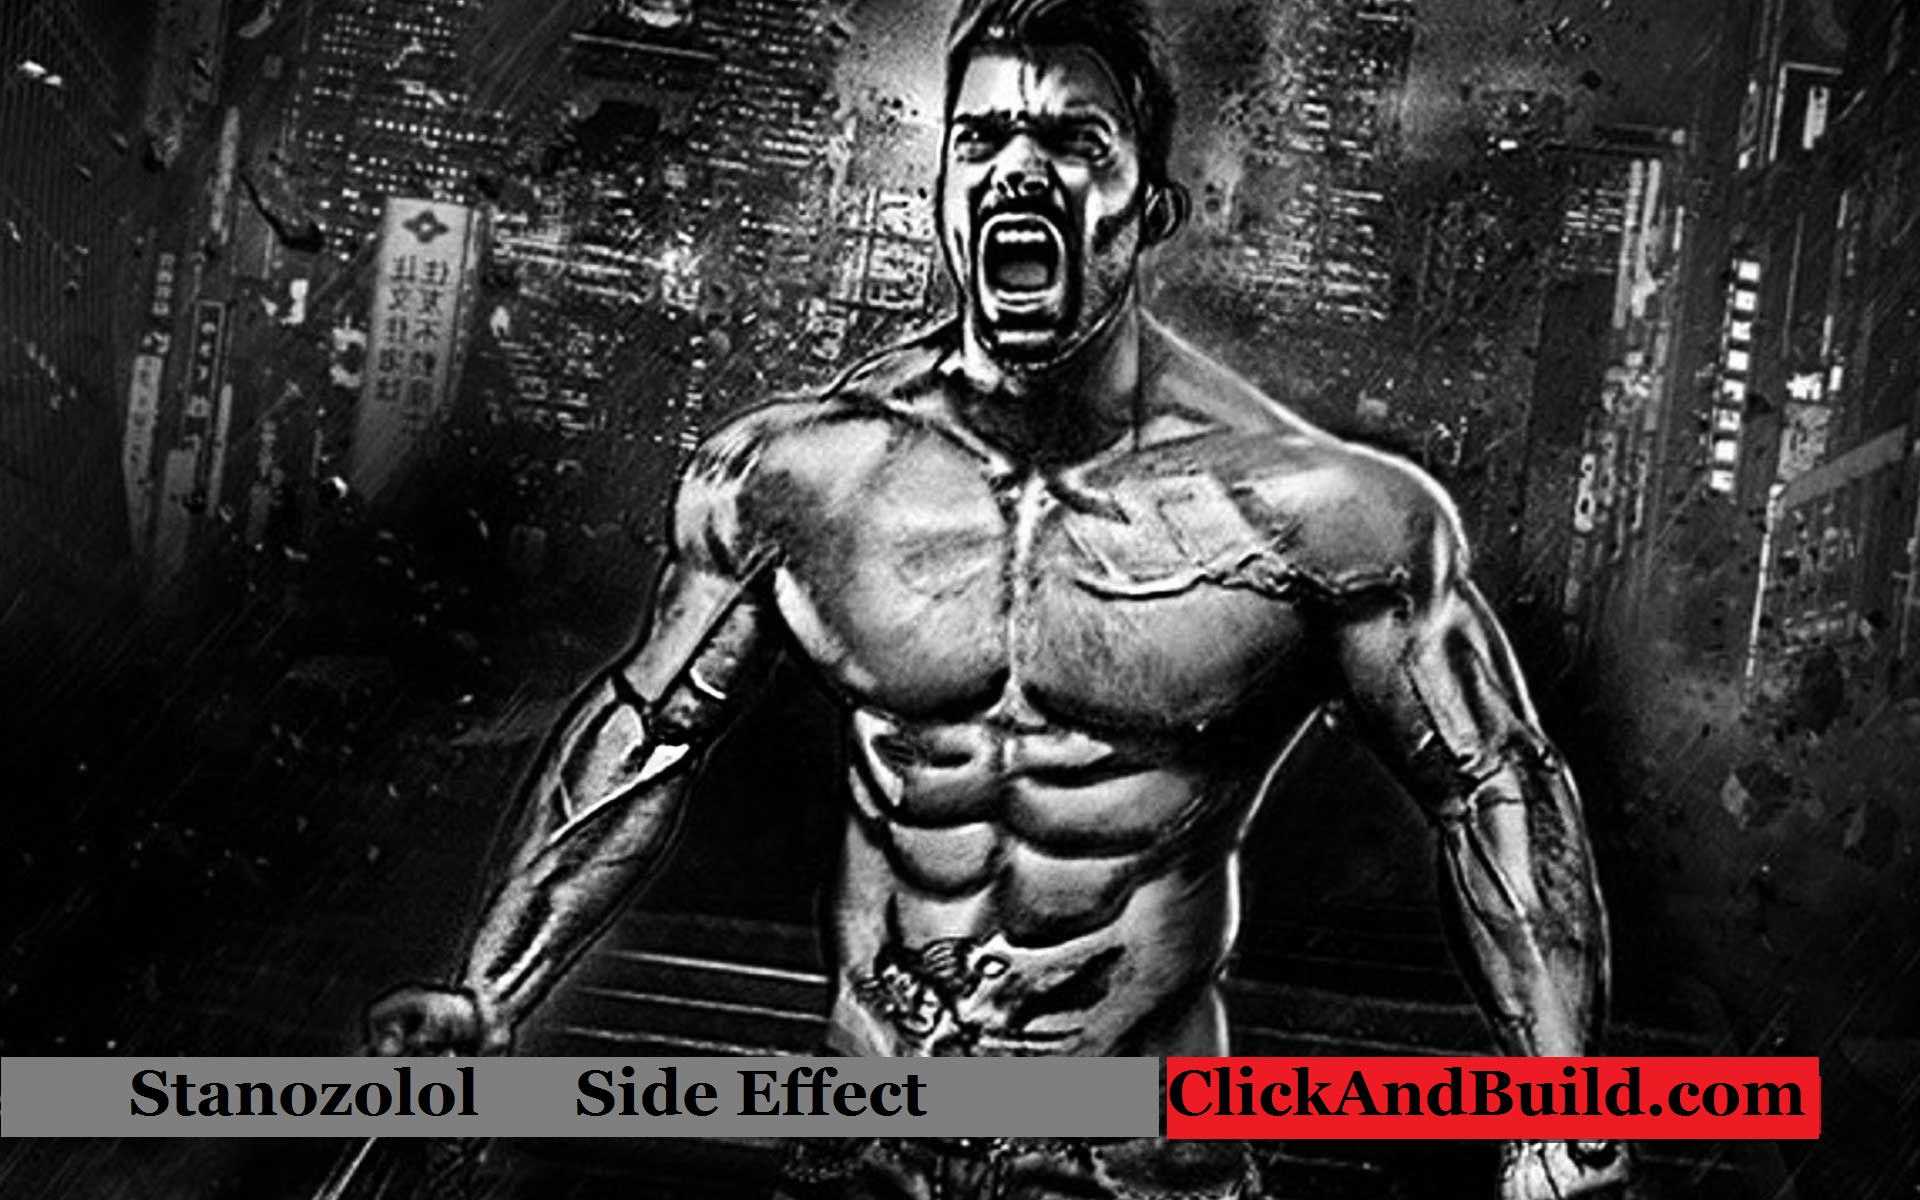 You are currently viewing Stanozolol Side Effect